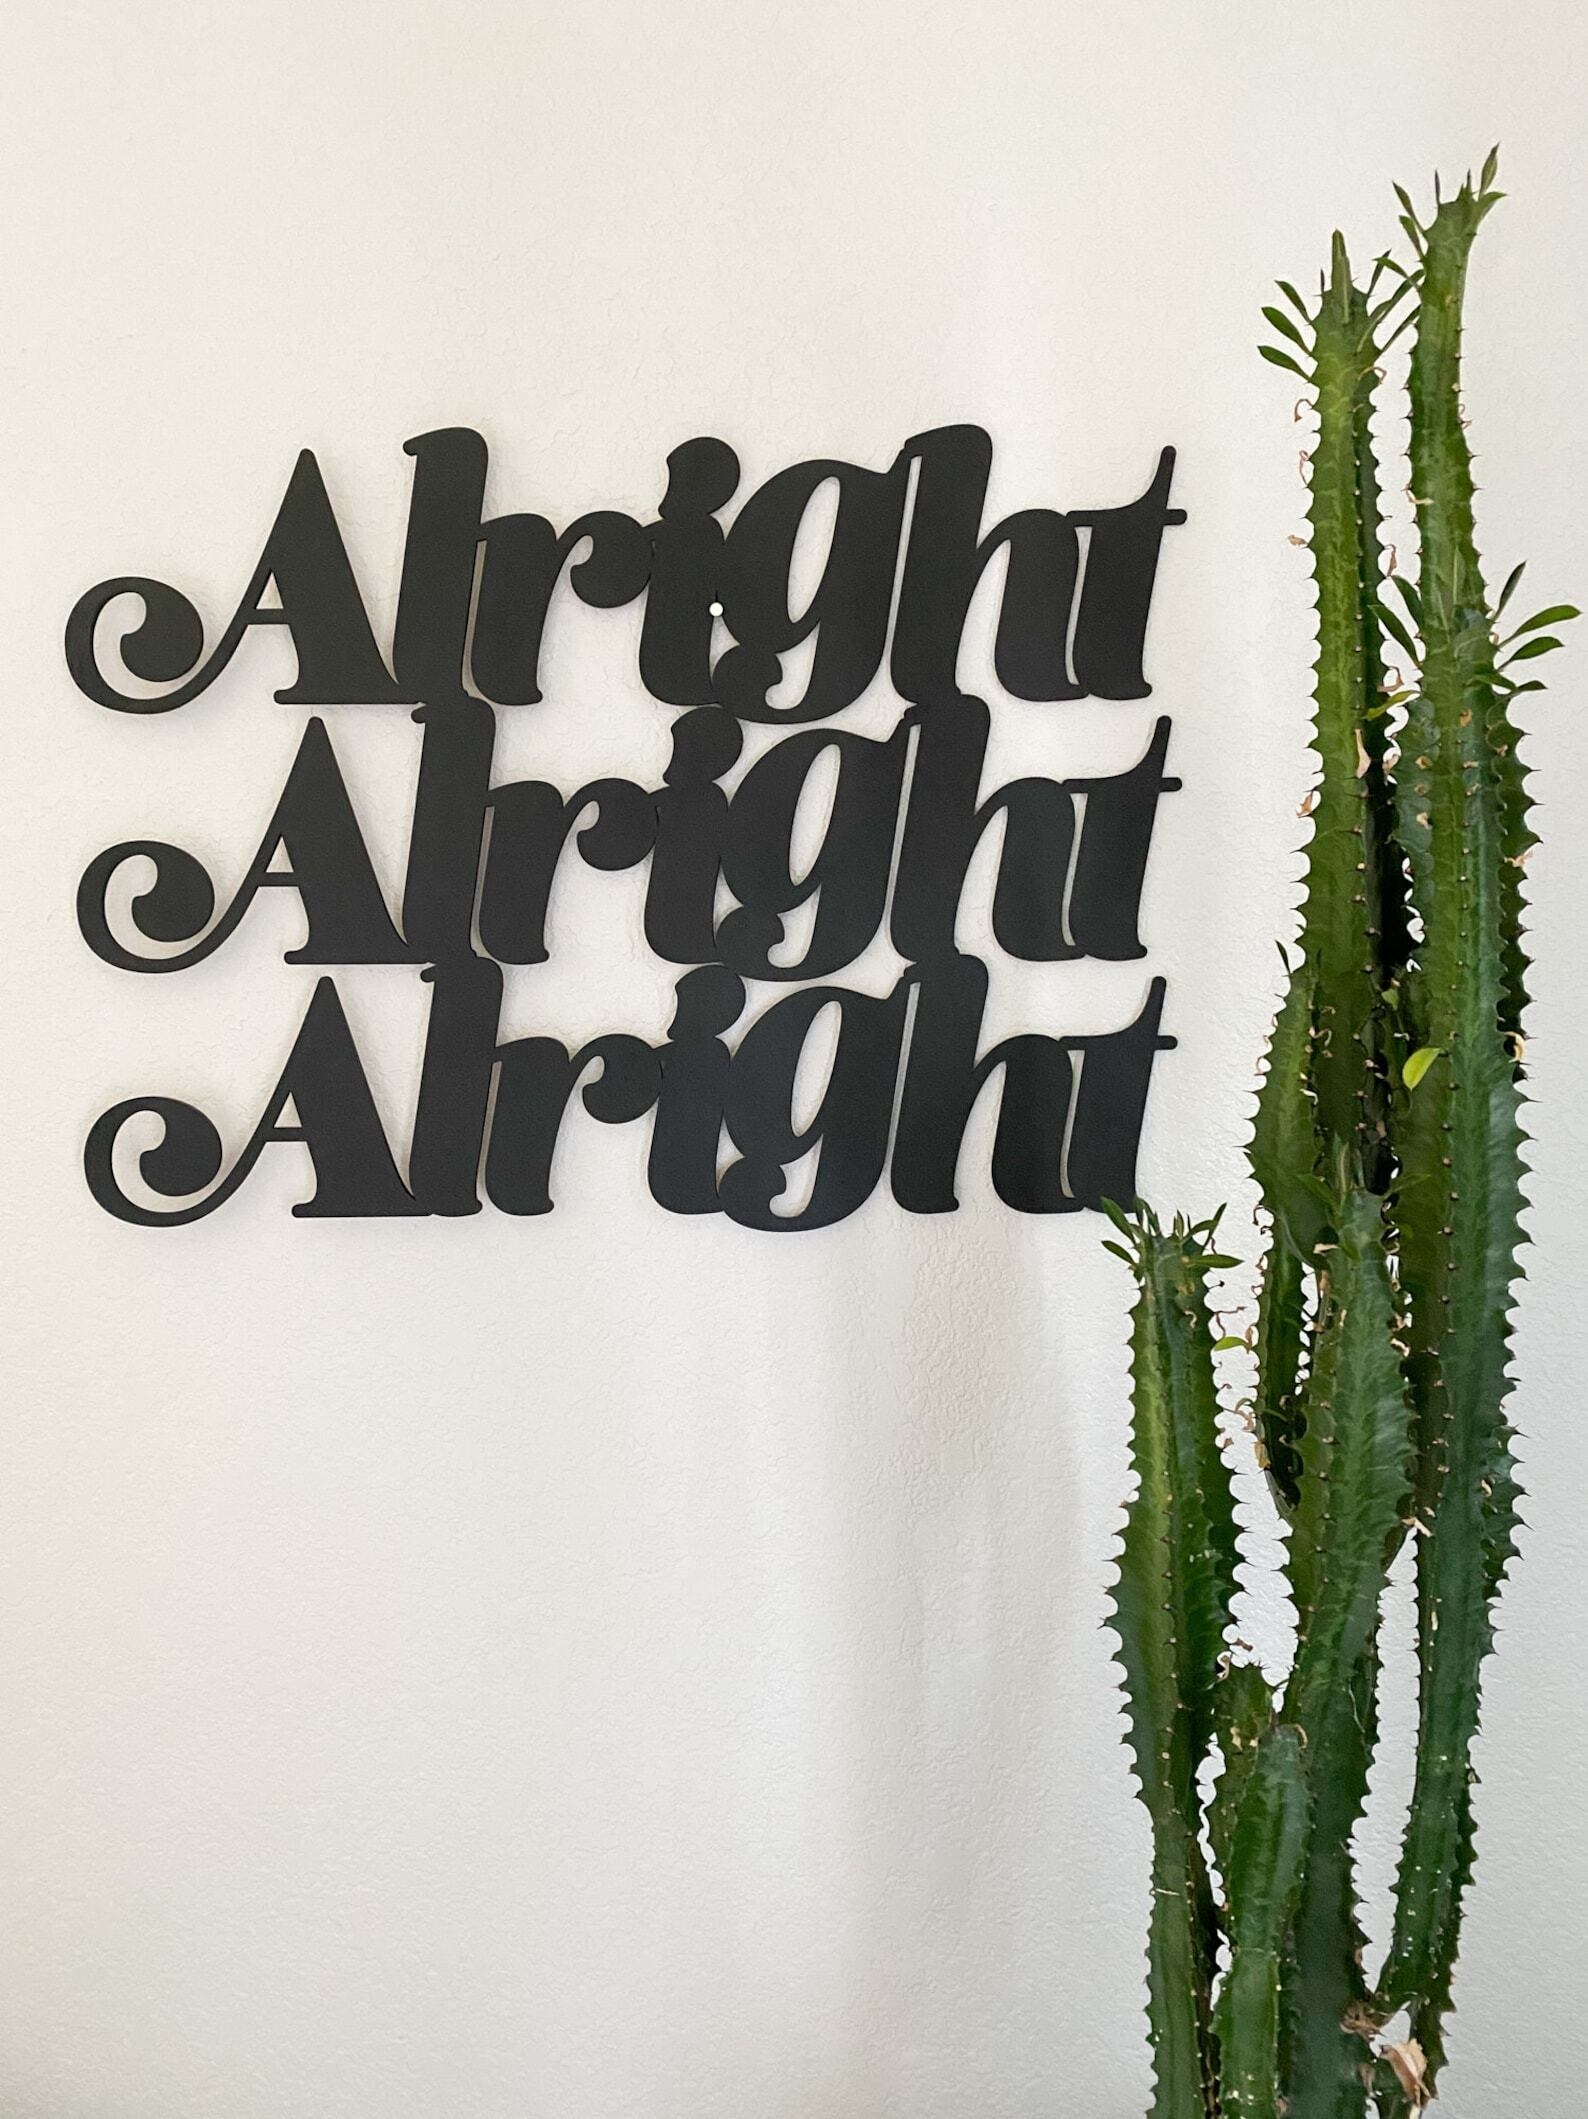 woodcut sign in retro text that says alright alright alright